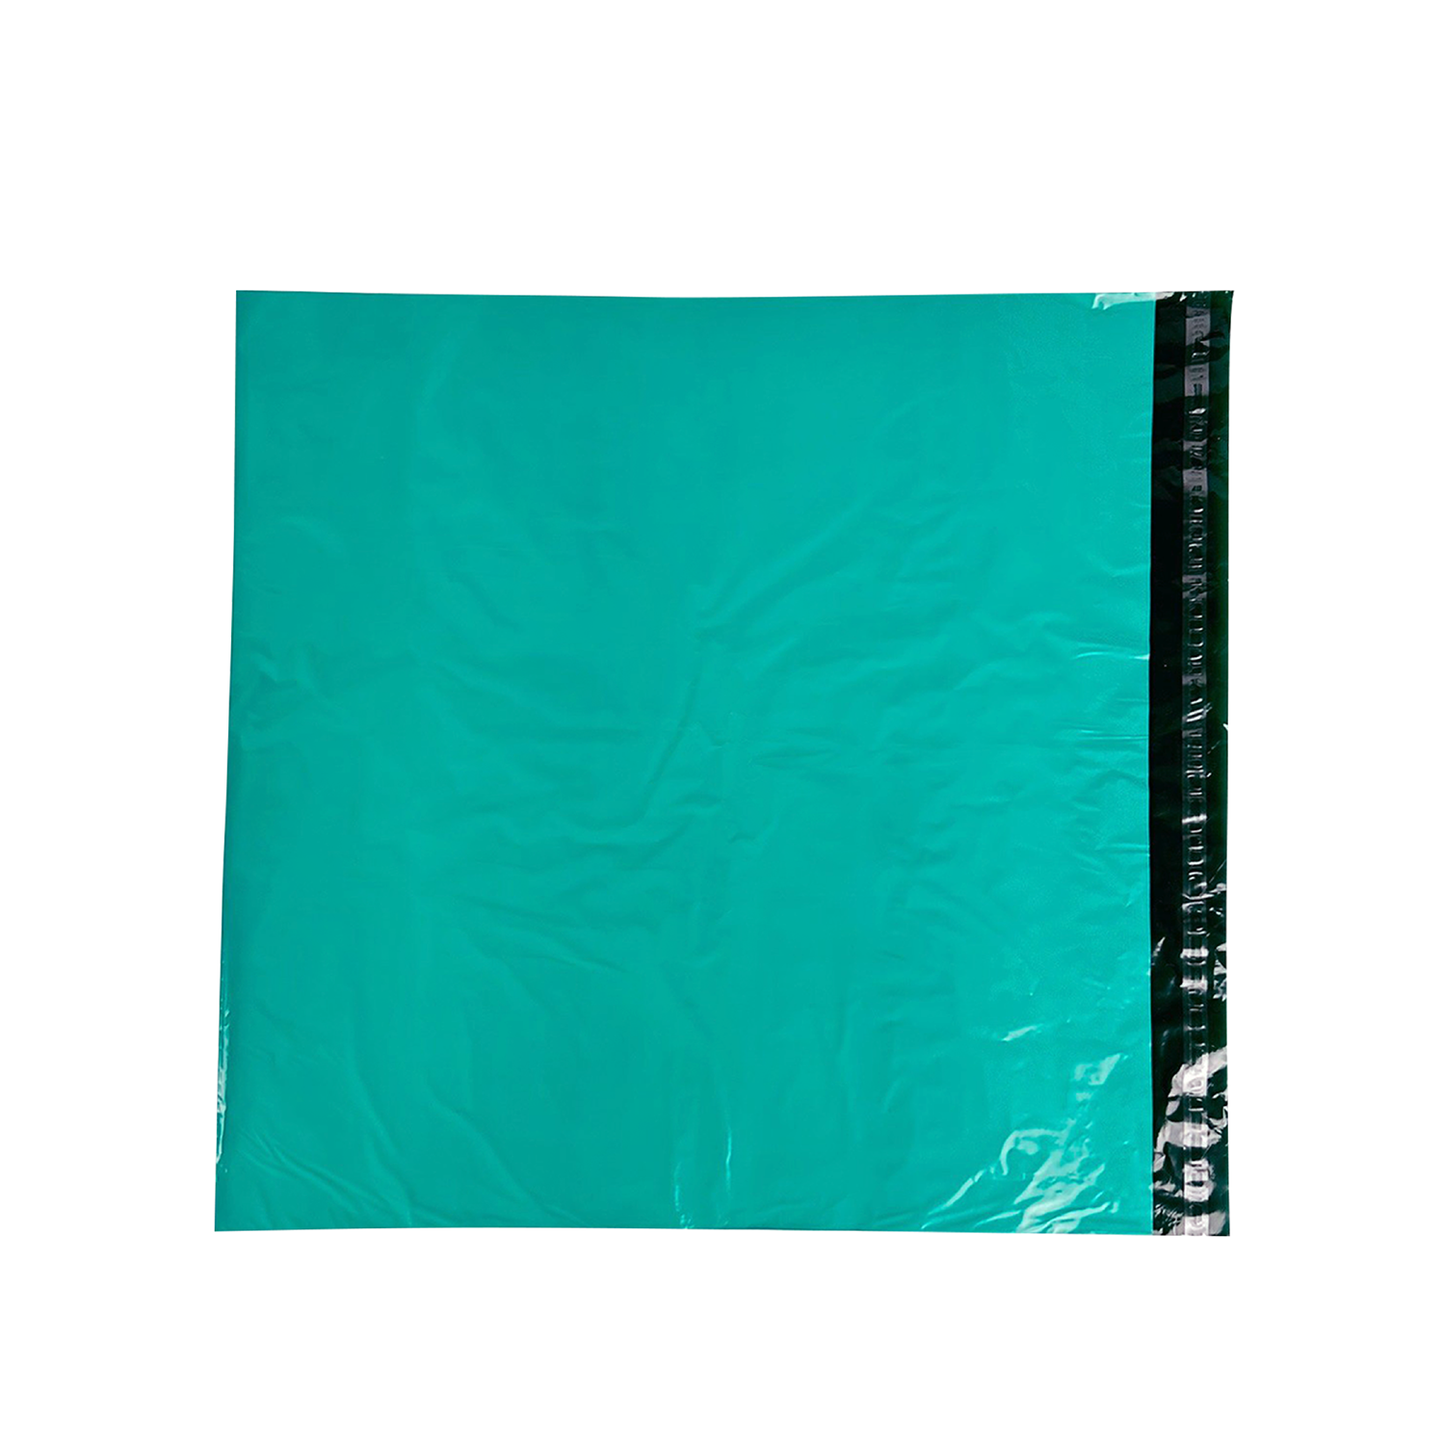 Owlpack Eco Friendly Recycled Mailers( Teal, Size 12x15.5, 24x24)